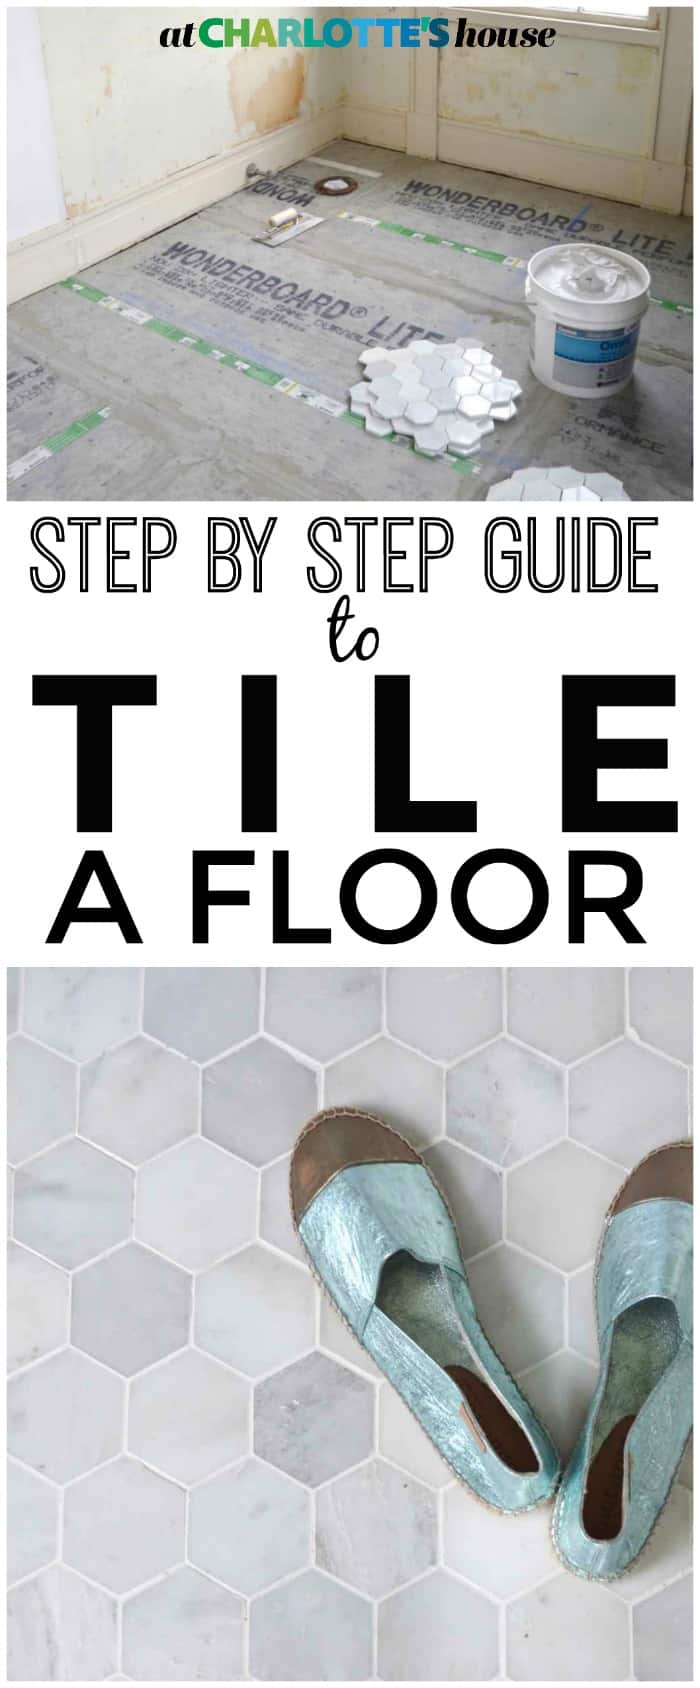 How to tile a bathroom floor... step by step guide!